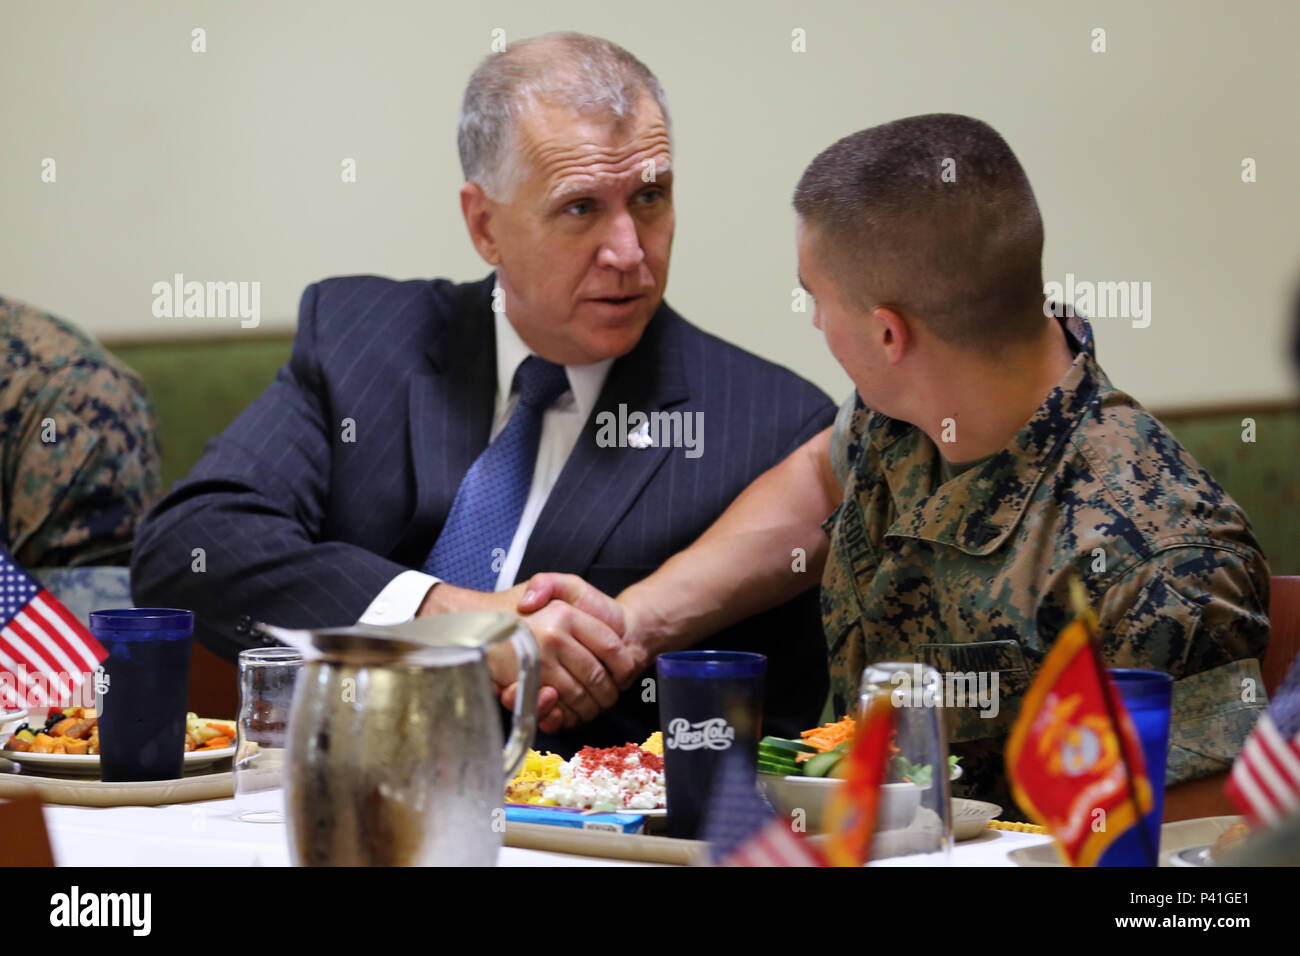 Sen. Thom Tillis, left, greets a Marine while sharing a meal at the mess hall during a visit at Marine Corps Air Station Cherry Point, N.C., June 1, 2016. Tillis visited the air station to address the needs and priorities of the base, and assess the Marine Corps’ presence in North Carolina. Tillis also toured Fleet Readiness Center East. Tillis is a North Carolina senator. (U.S. Marine Corps photo by Lance Cpl. Mackenzie Gibson/Released) Stock Photo